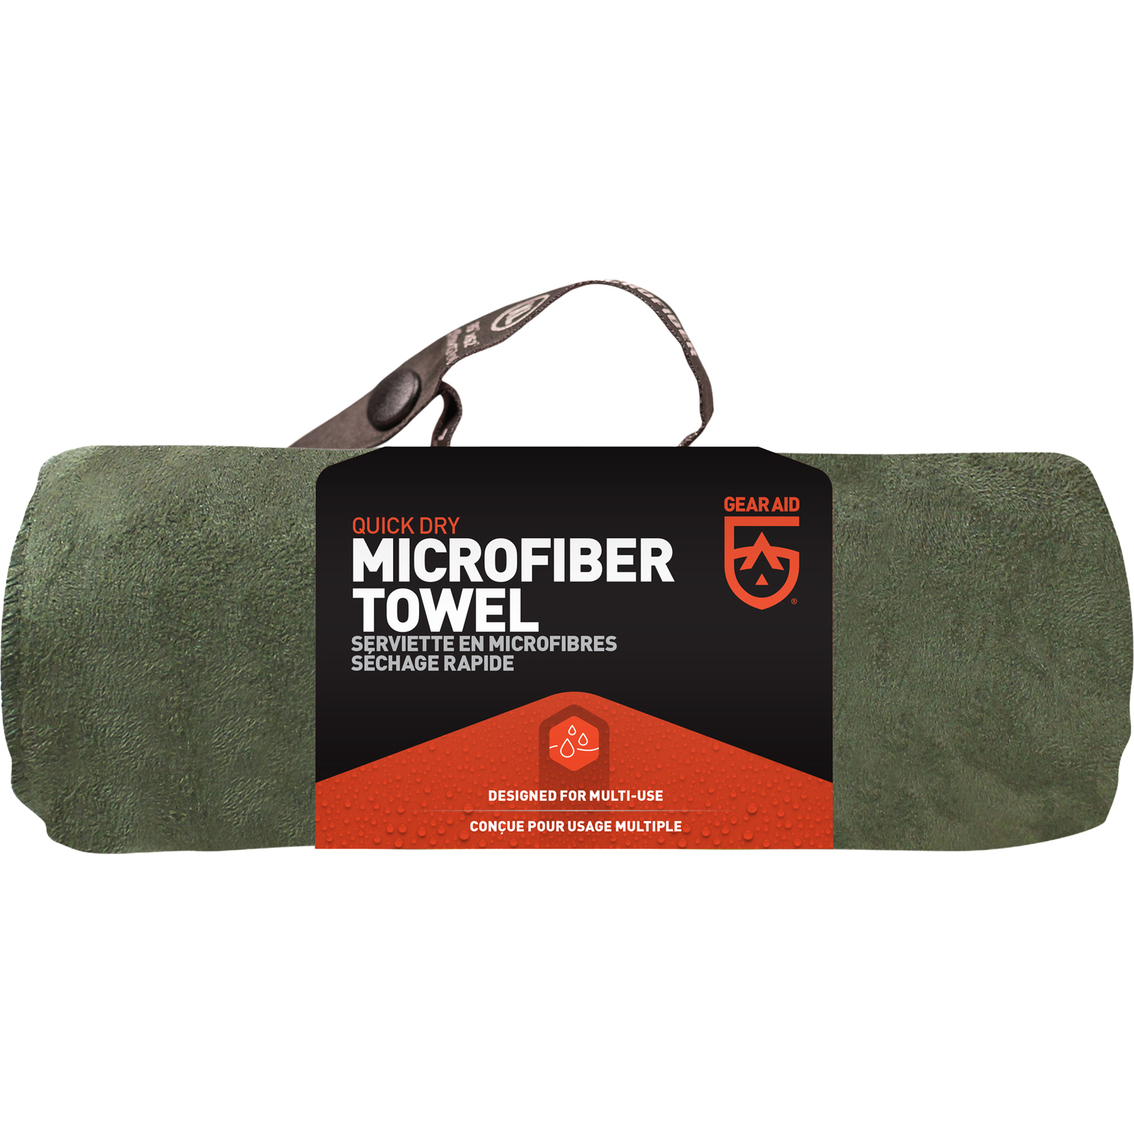 Microfiber Towel Quick Drying Absorbent Antibacterial Lightweight Packable Army 